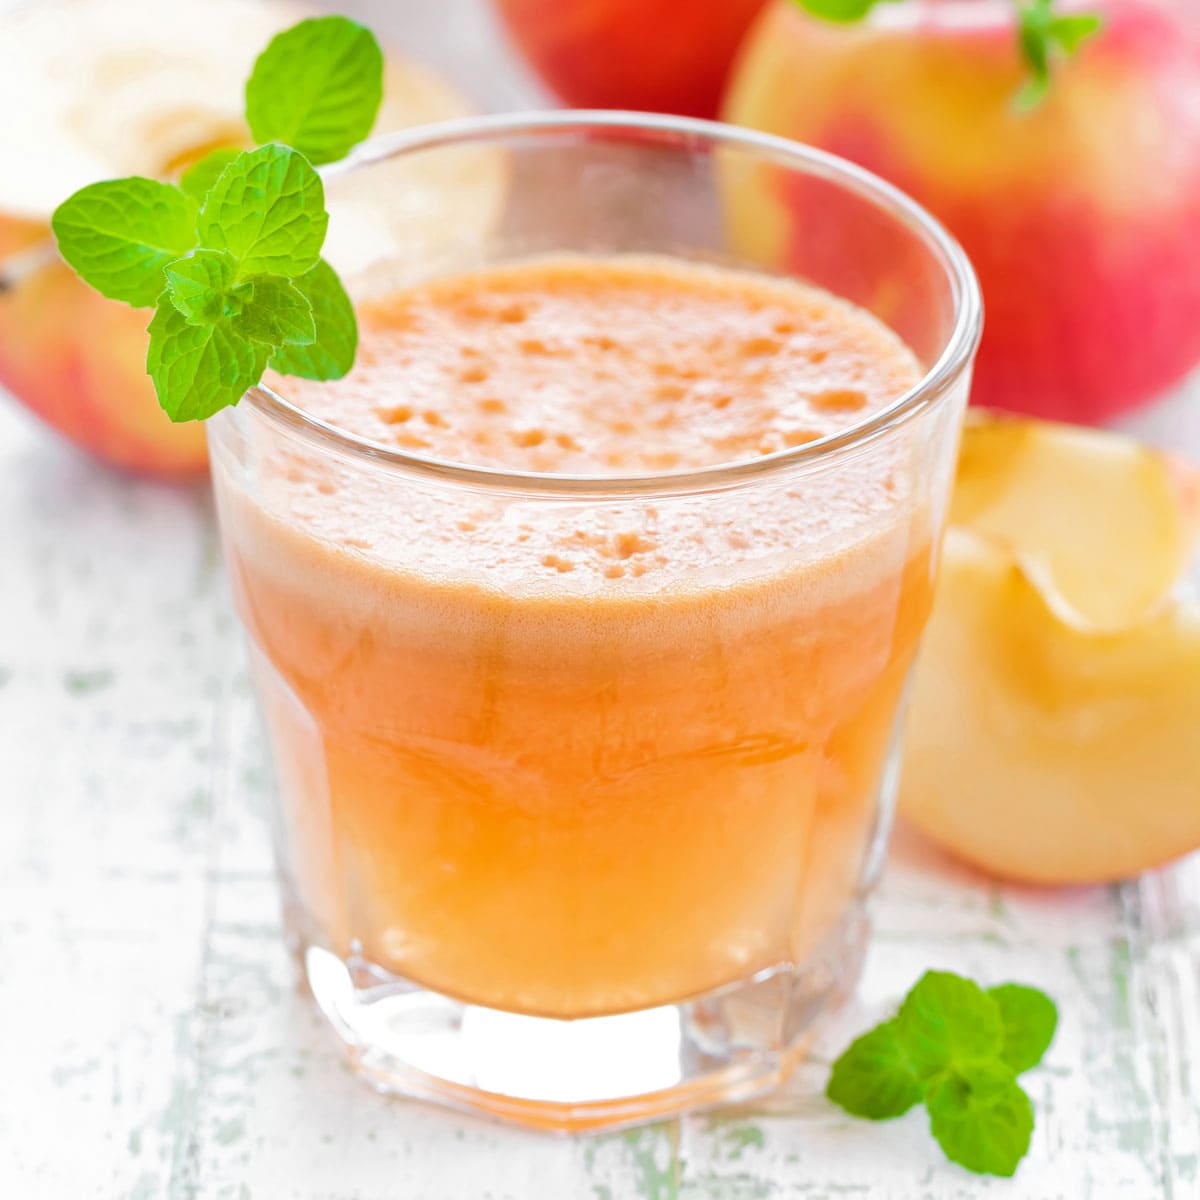 How To Make Apple Juice